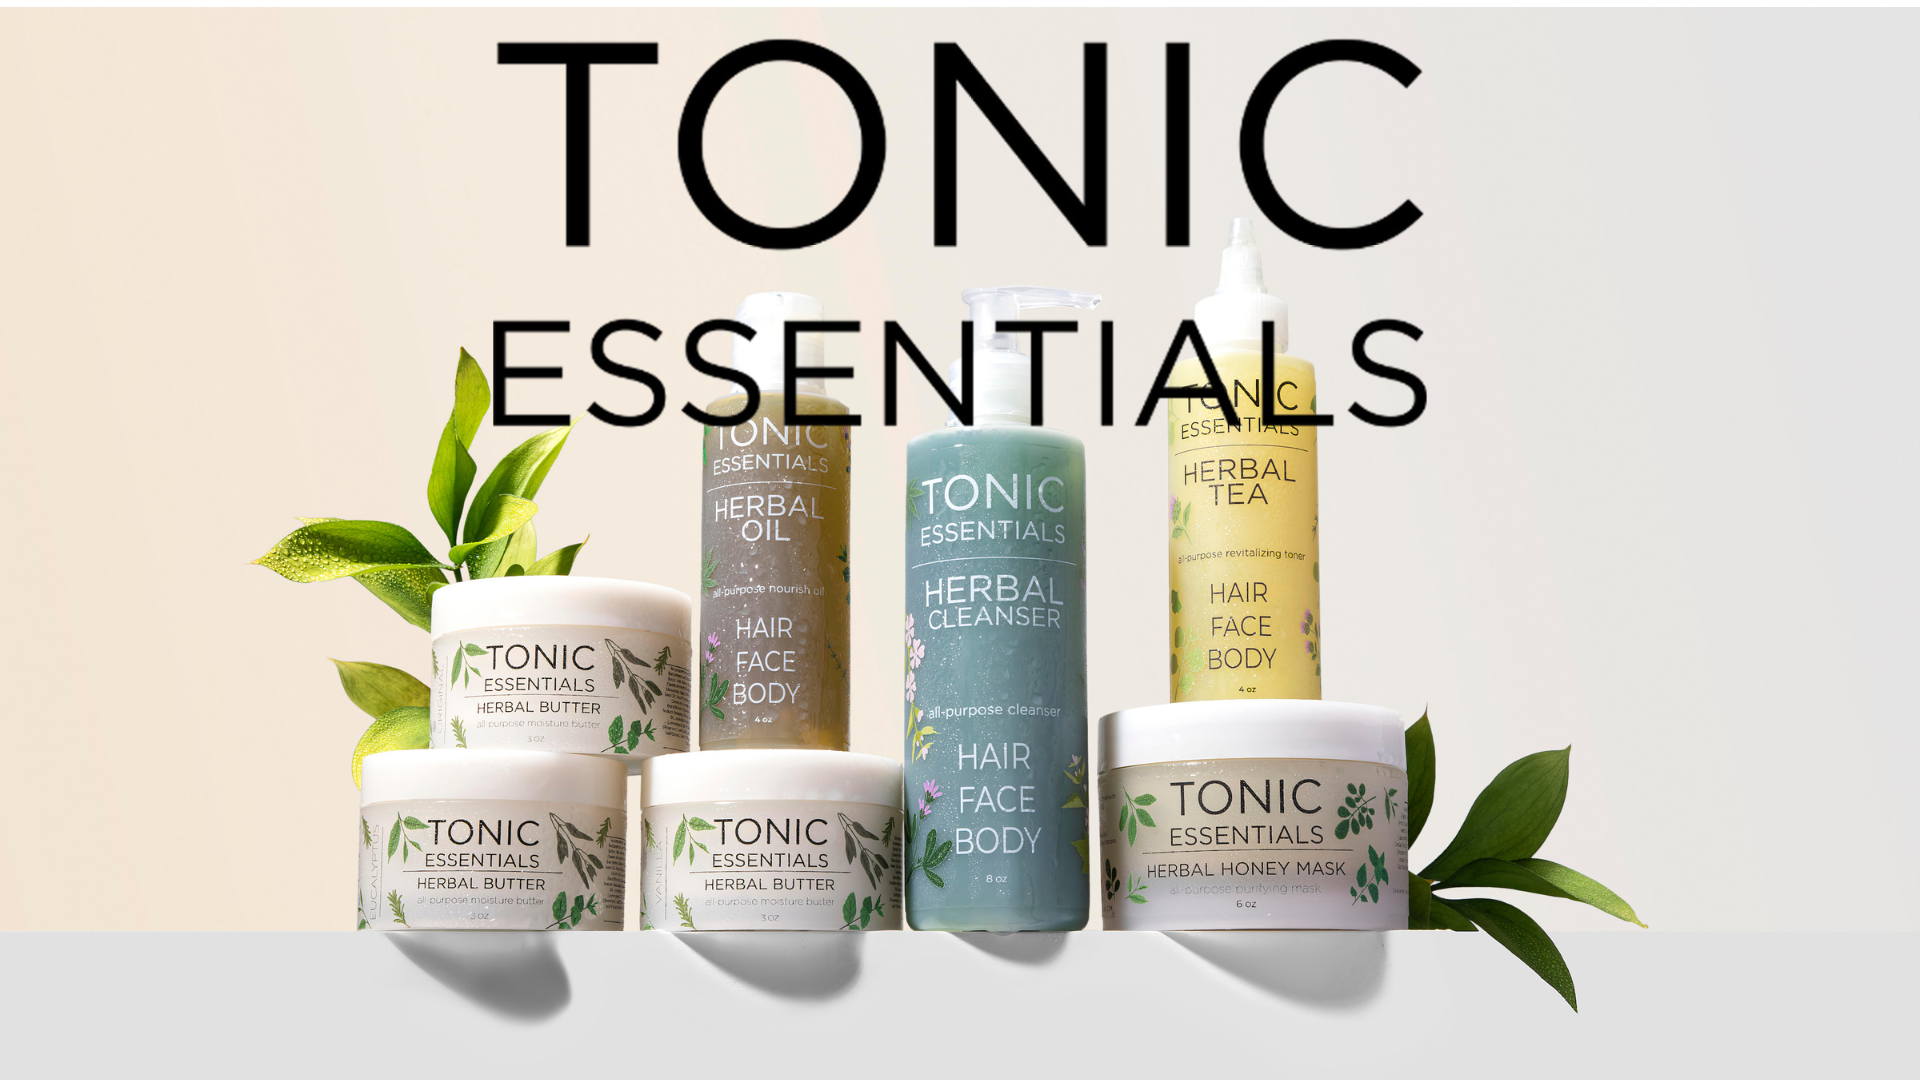 The logo or business face of "Tonic Essentials"